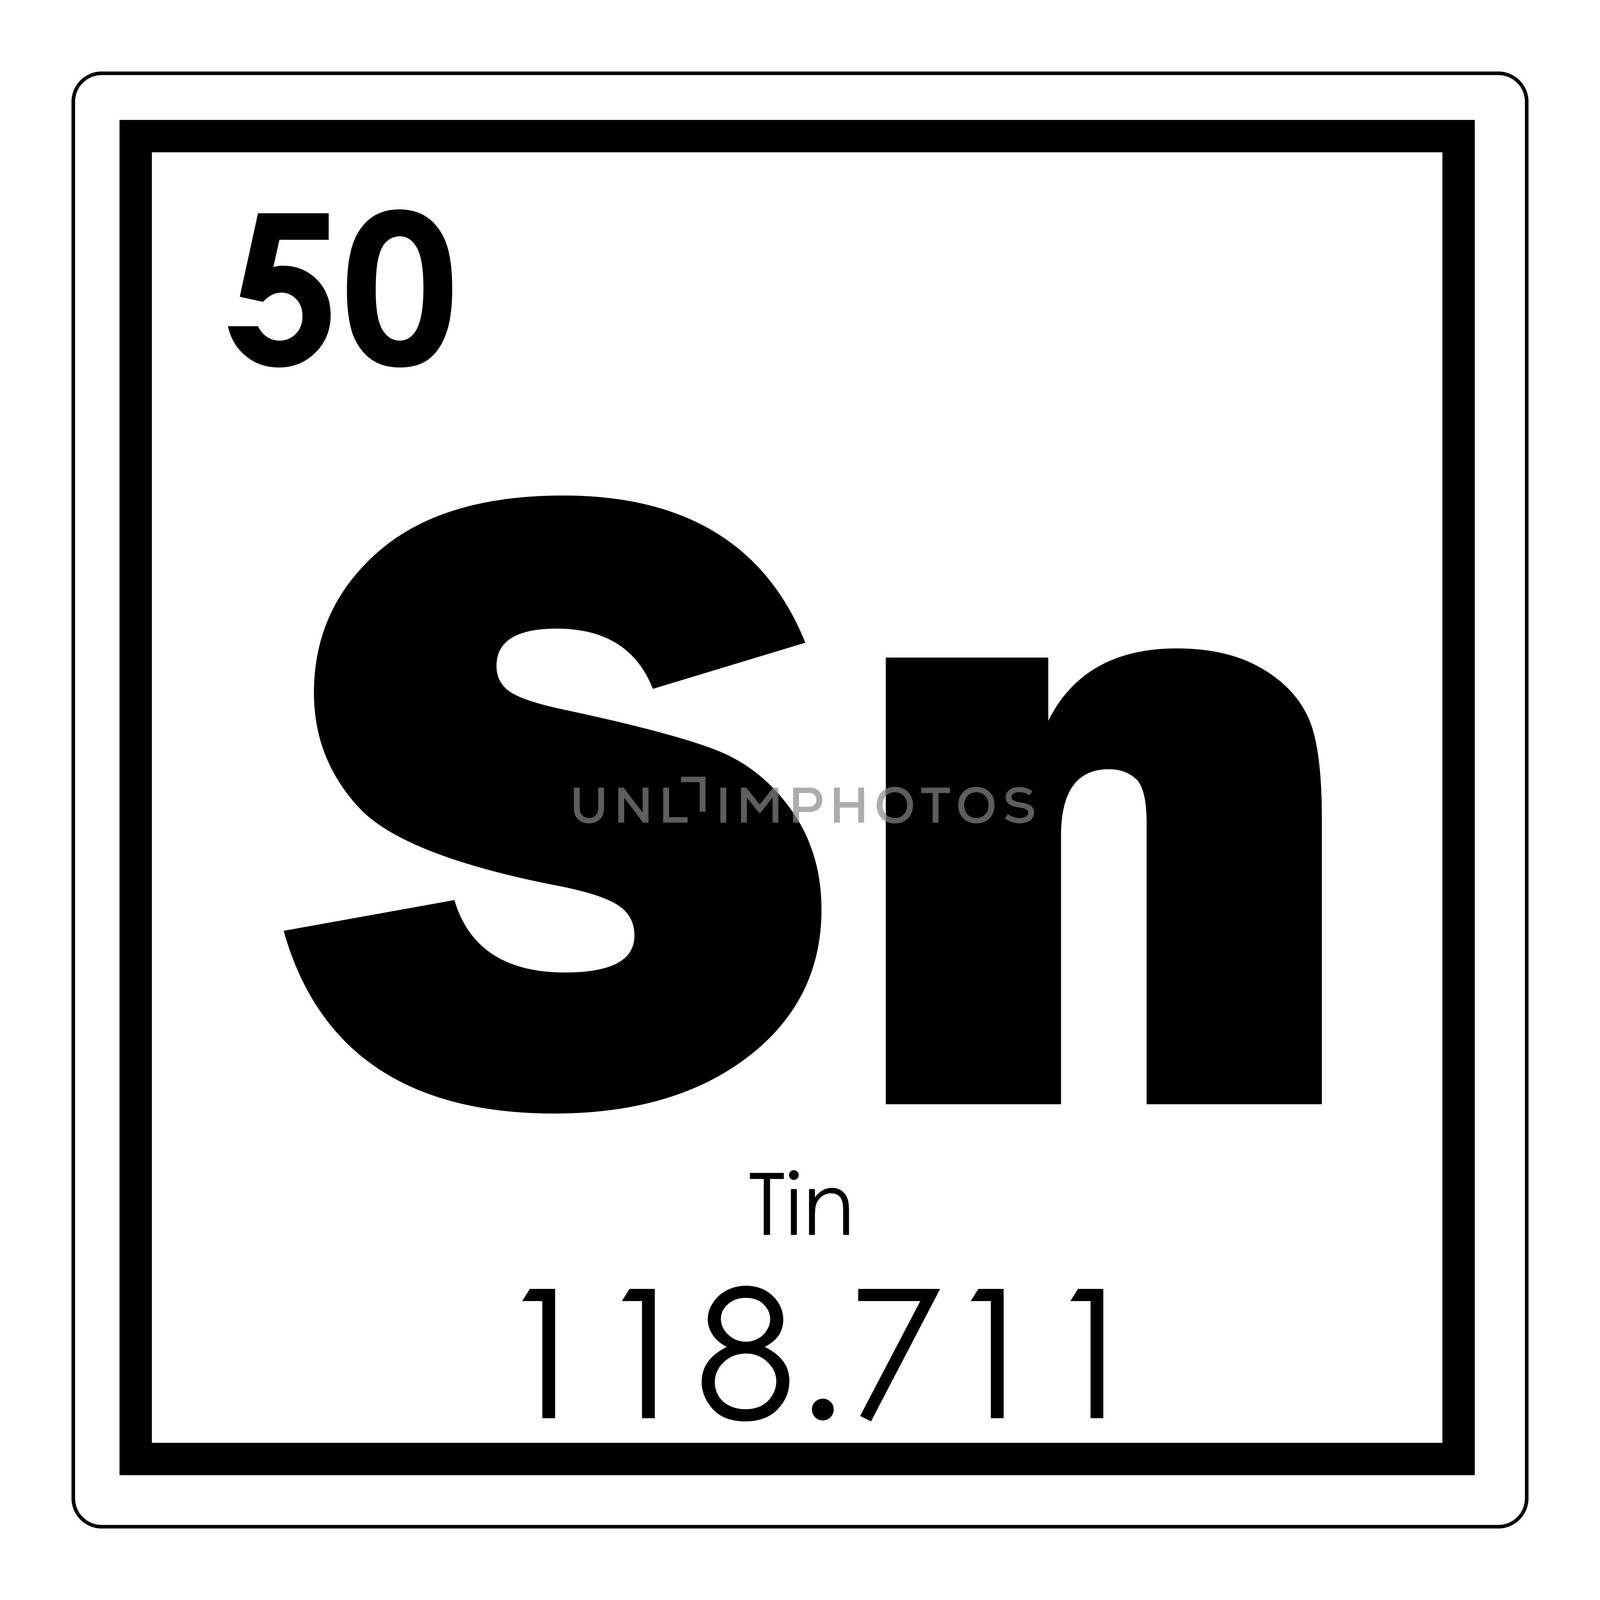 Tin chemical element by tony4urban